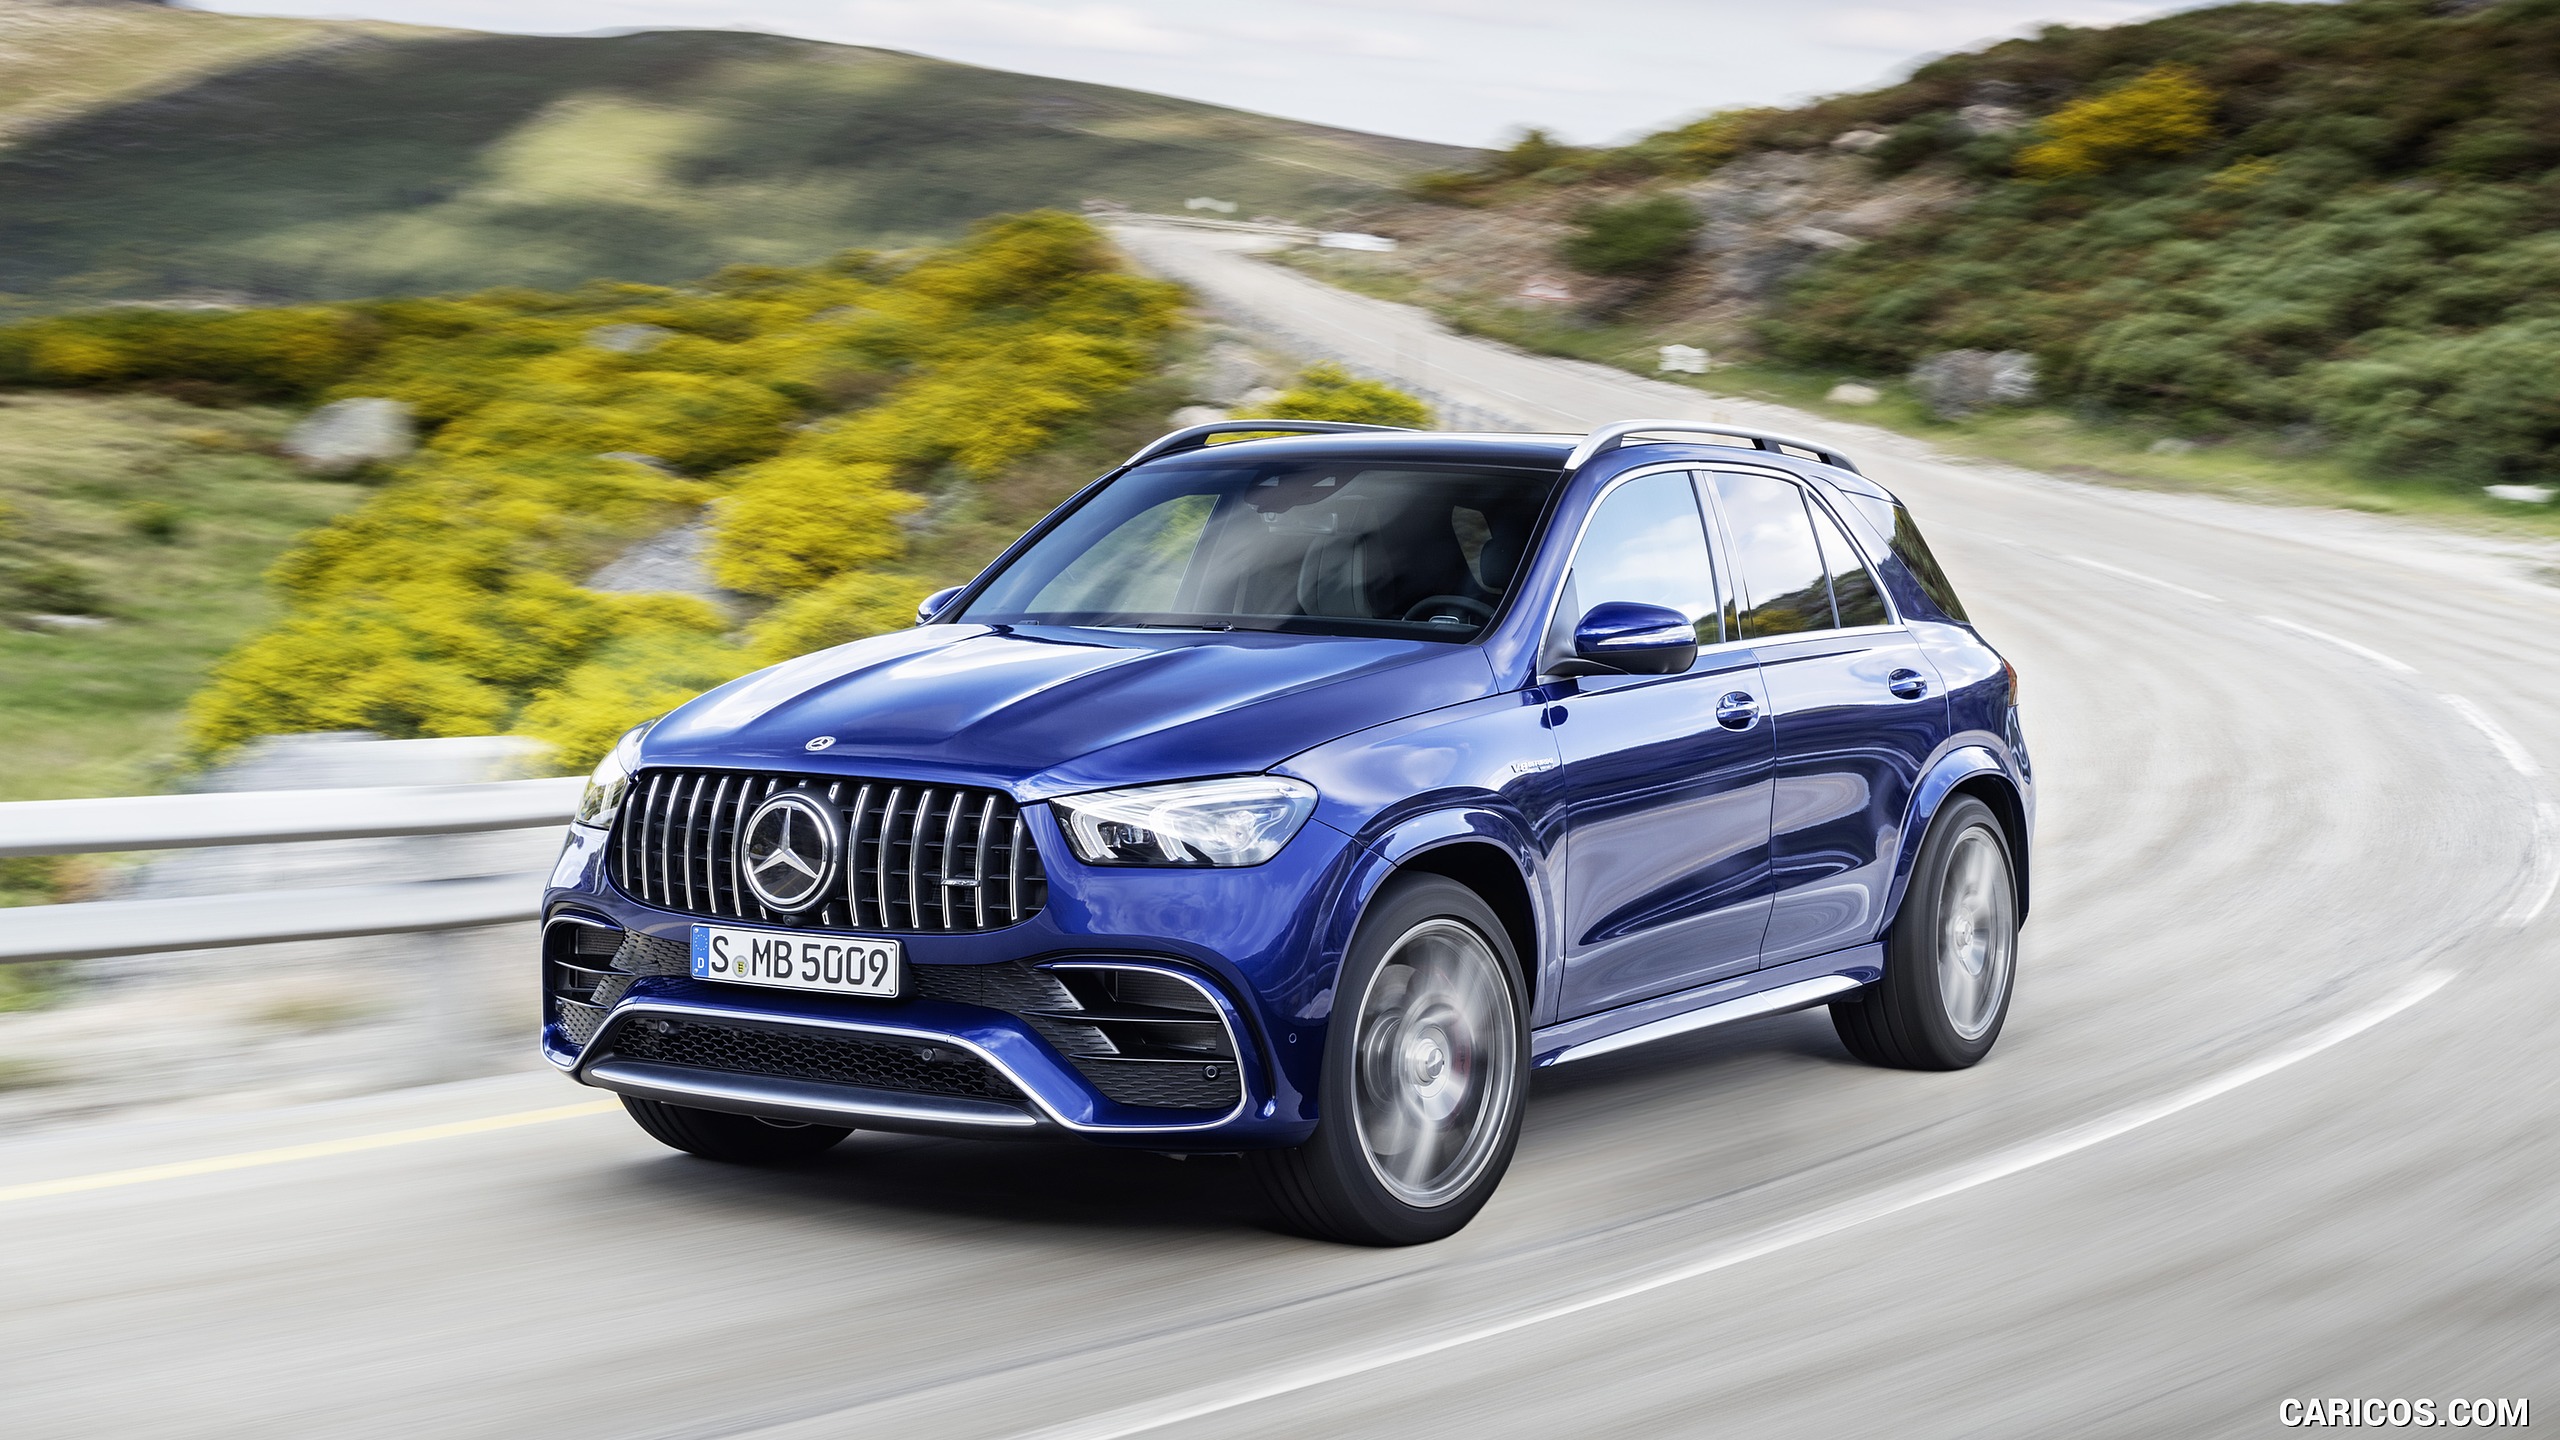 2021 Mercedes-AMG GLE 63 S 4MATIC - Front Three-Quarter, #1 of 187